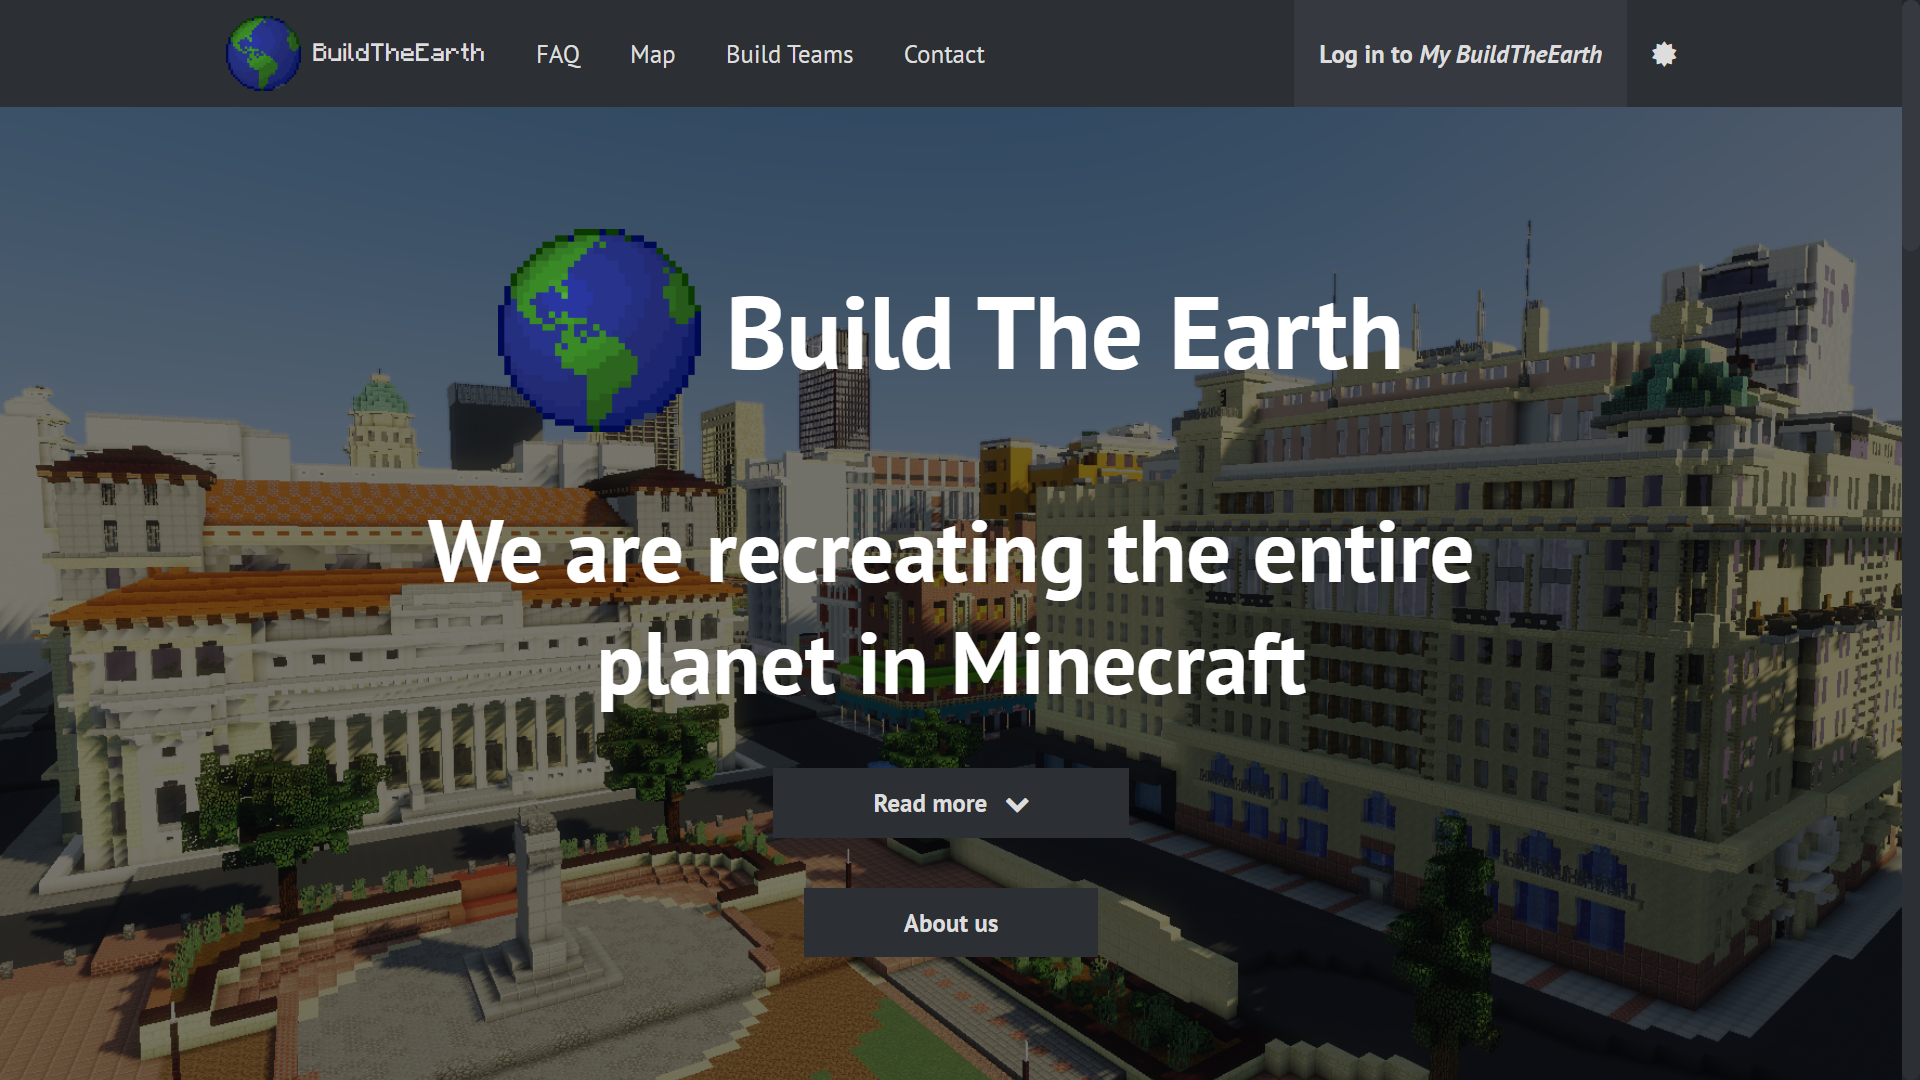 BuildTheEarth